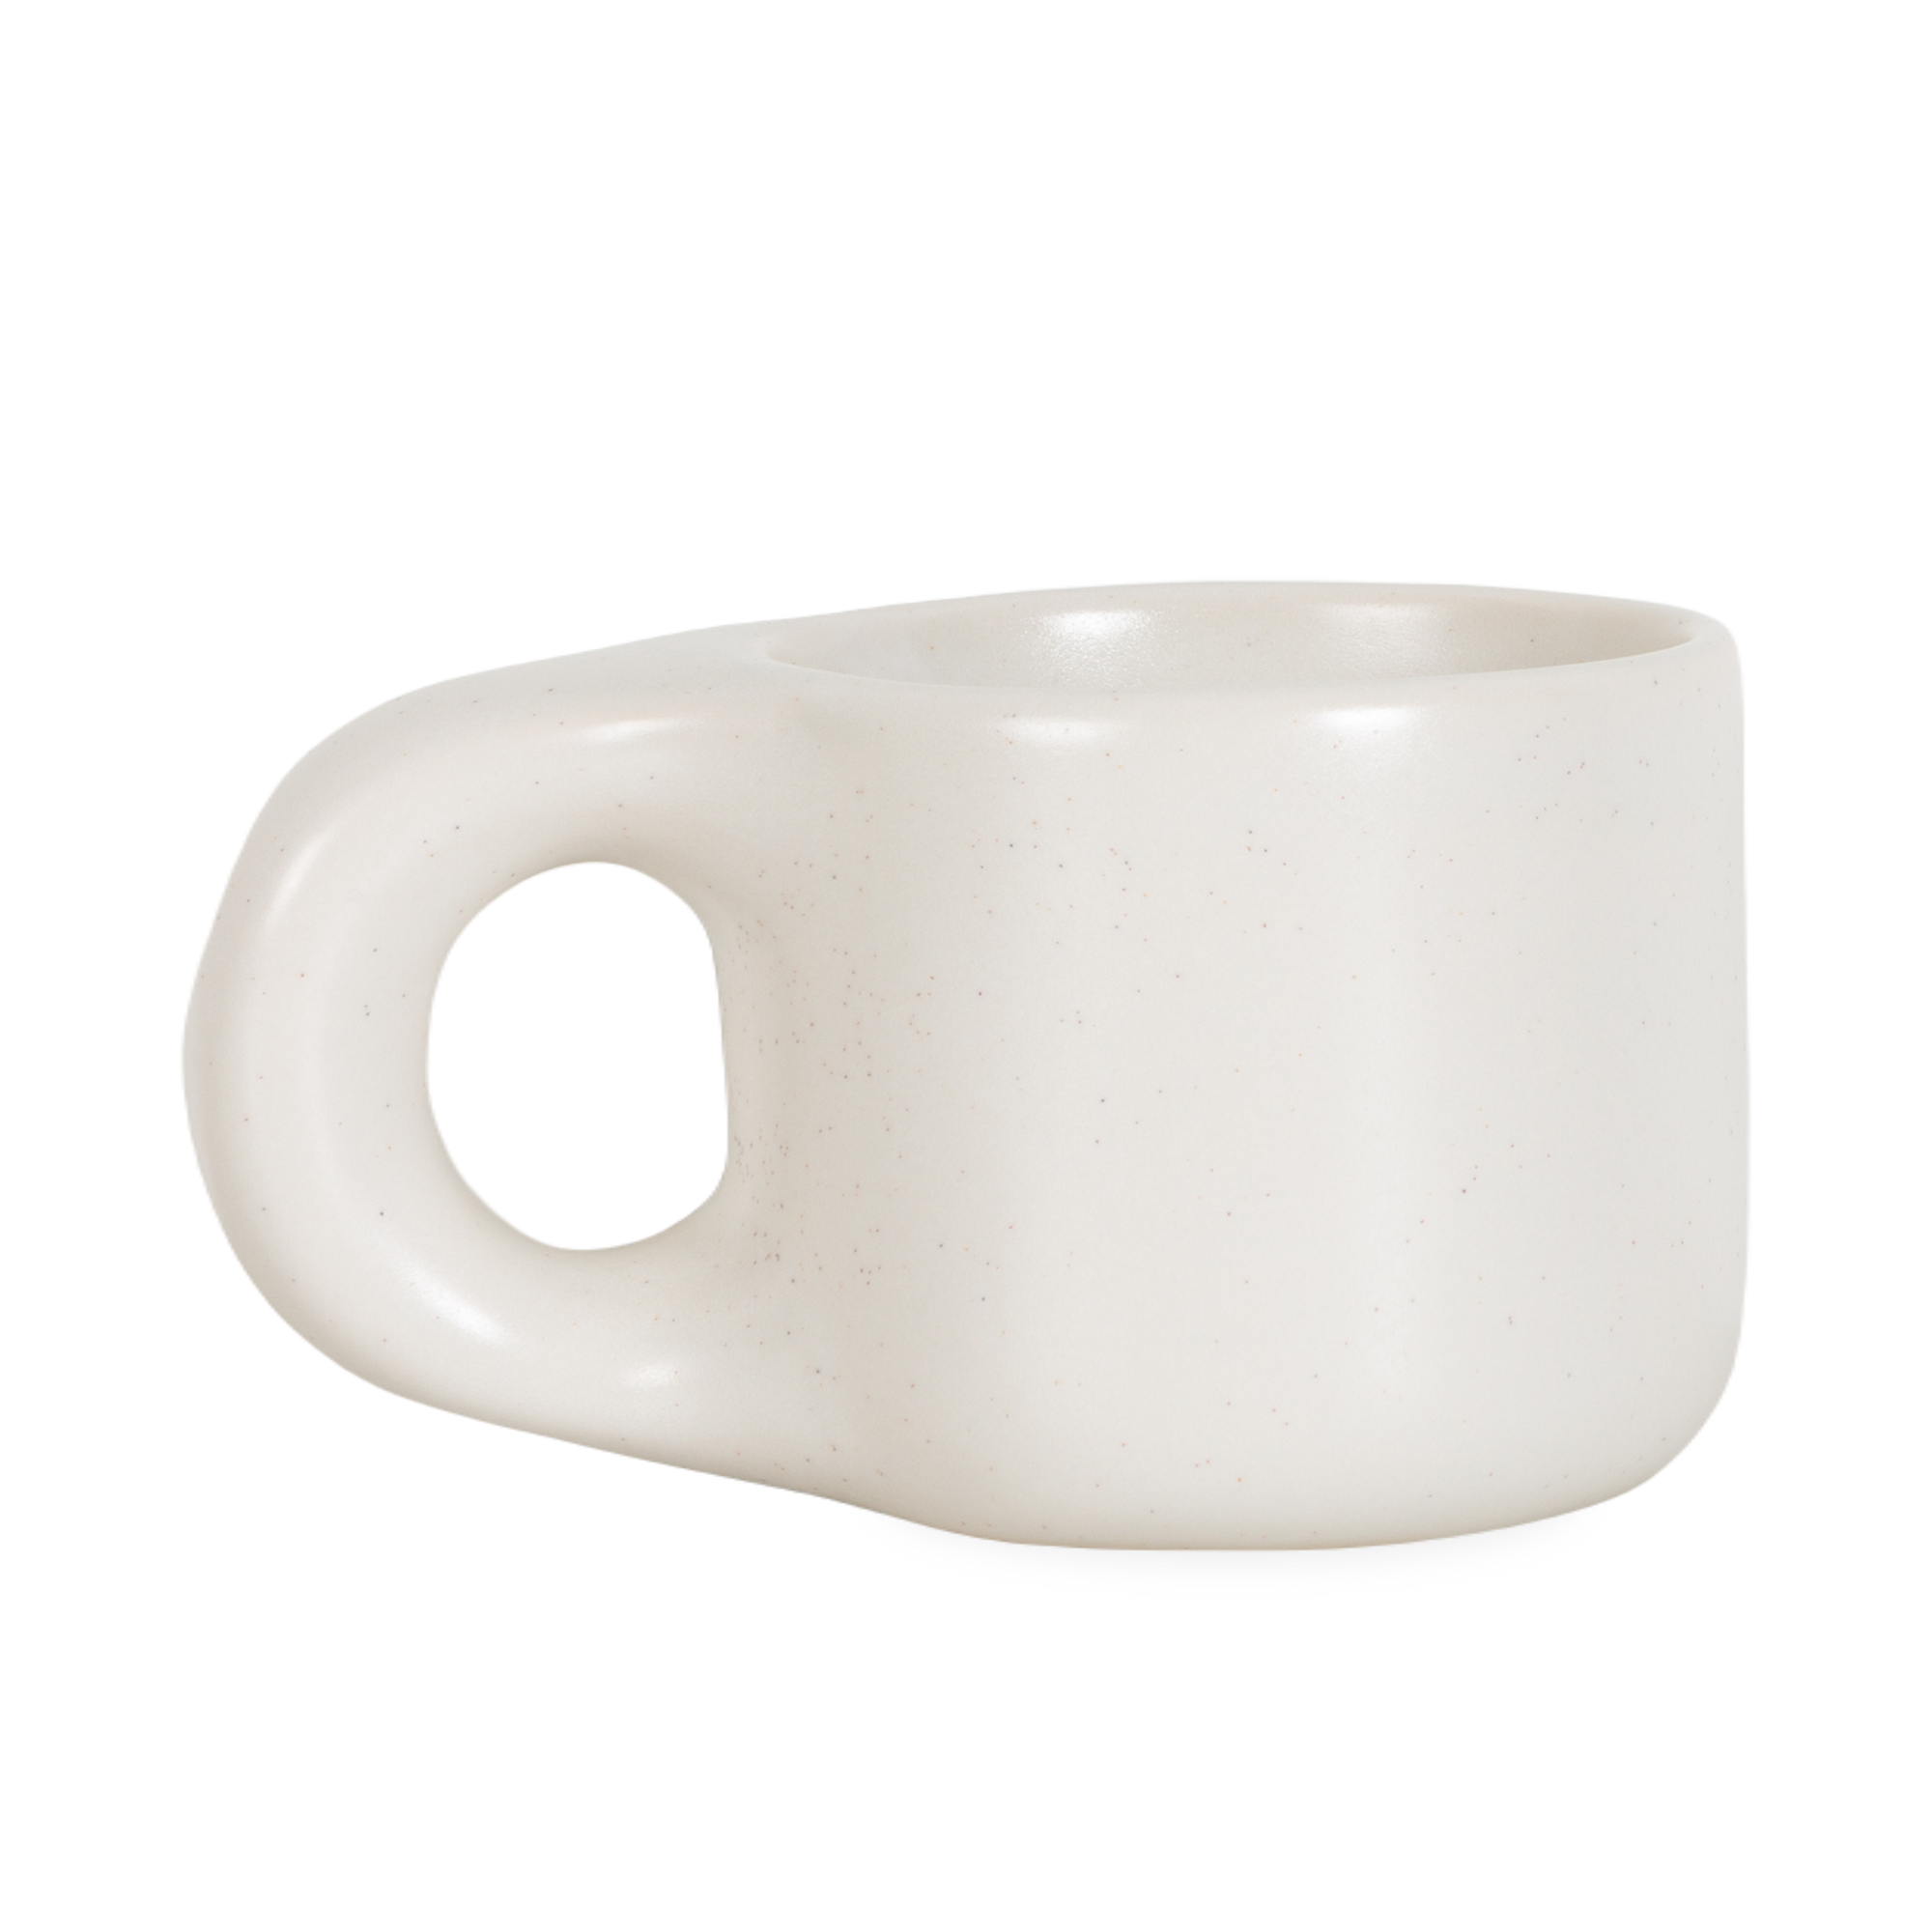 Cast in stoneware from a hand-formed original, the Dough Stoneware Mug has a minimalist, sculptural quality complemented by an outsized handle, creating a uniquely portioned silhou